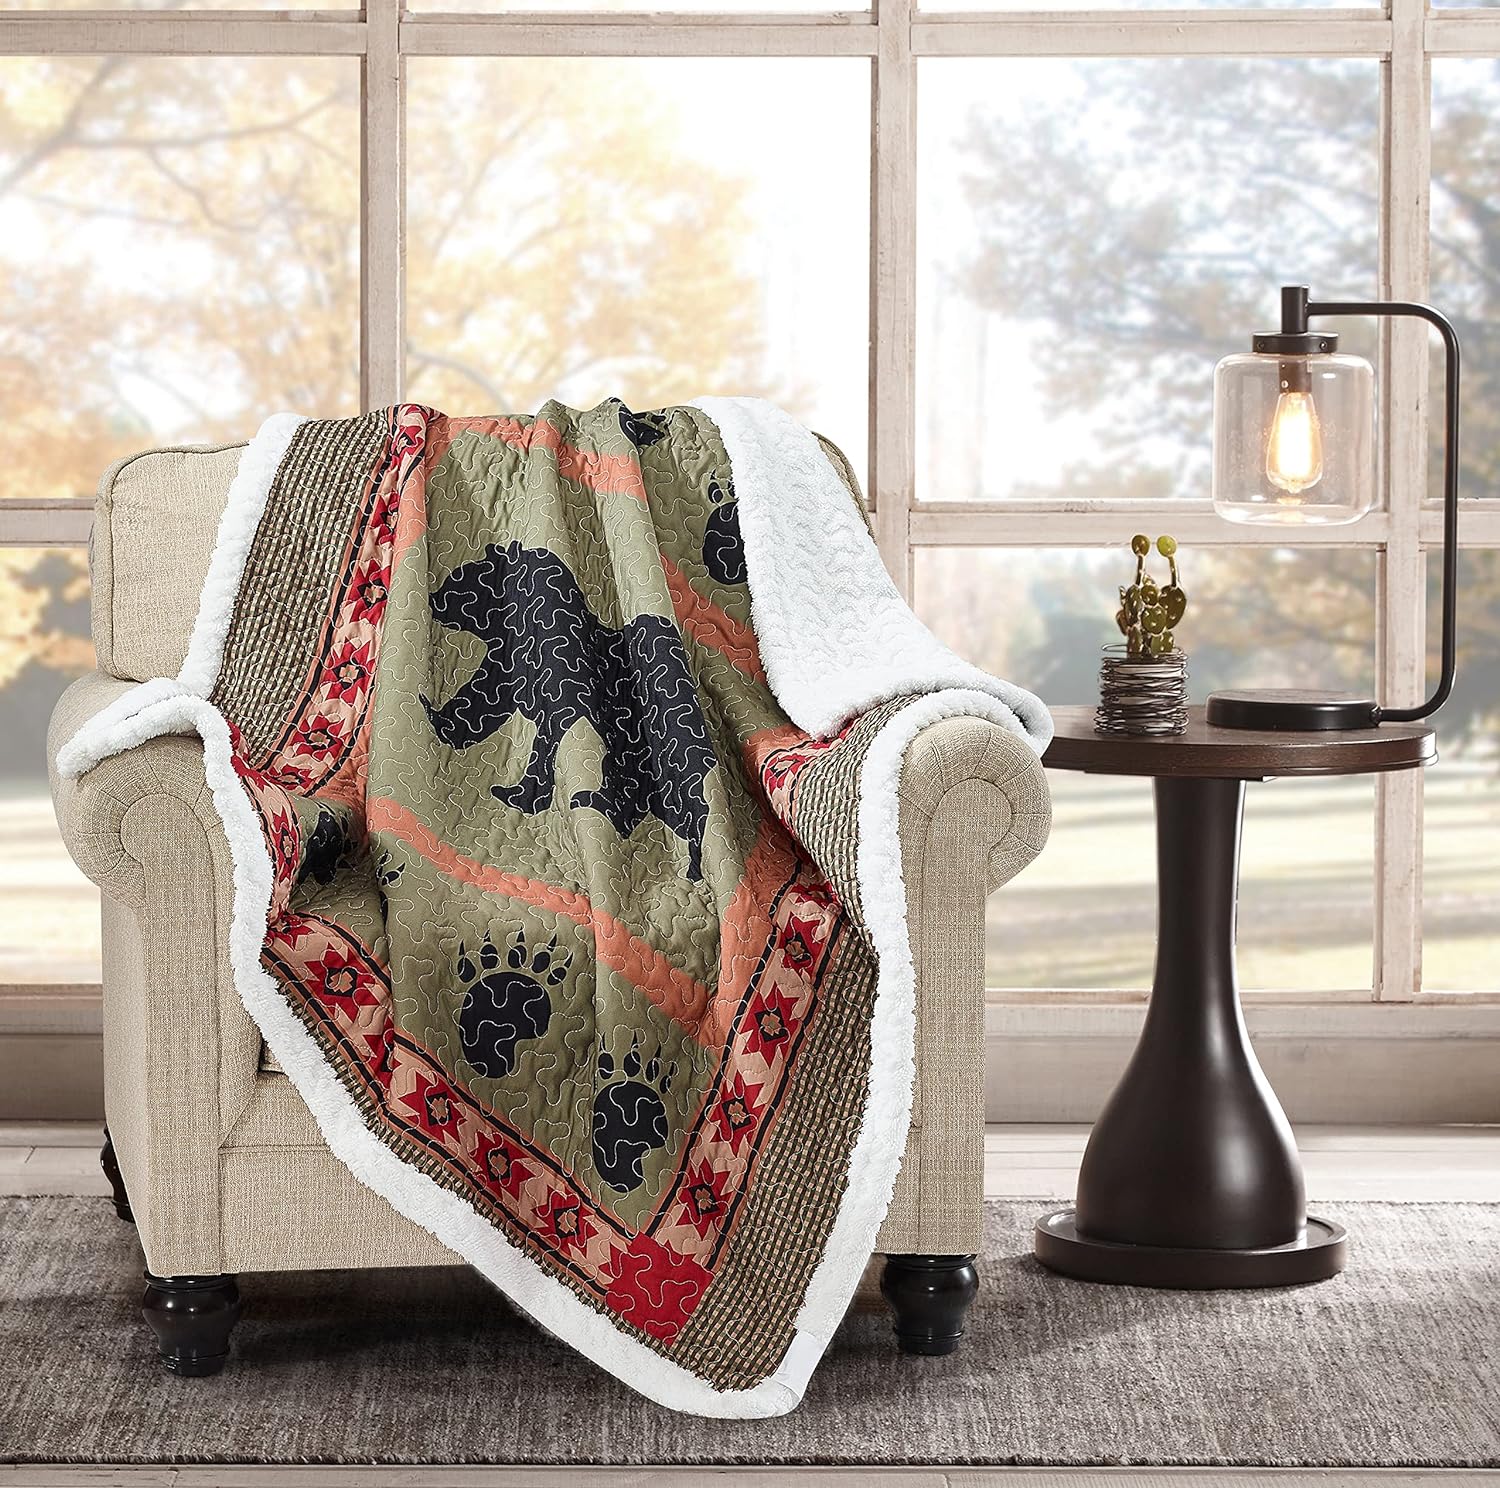 Virah Bella Quilted Bear Rustic Sherpa Throw Blanket for Couch - 50" x 60" - Bear and Paw Lodge-Themed Throw Quilt